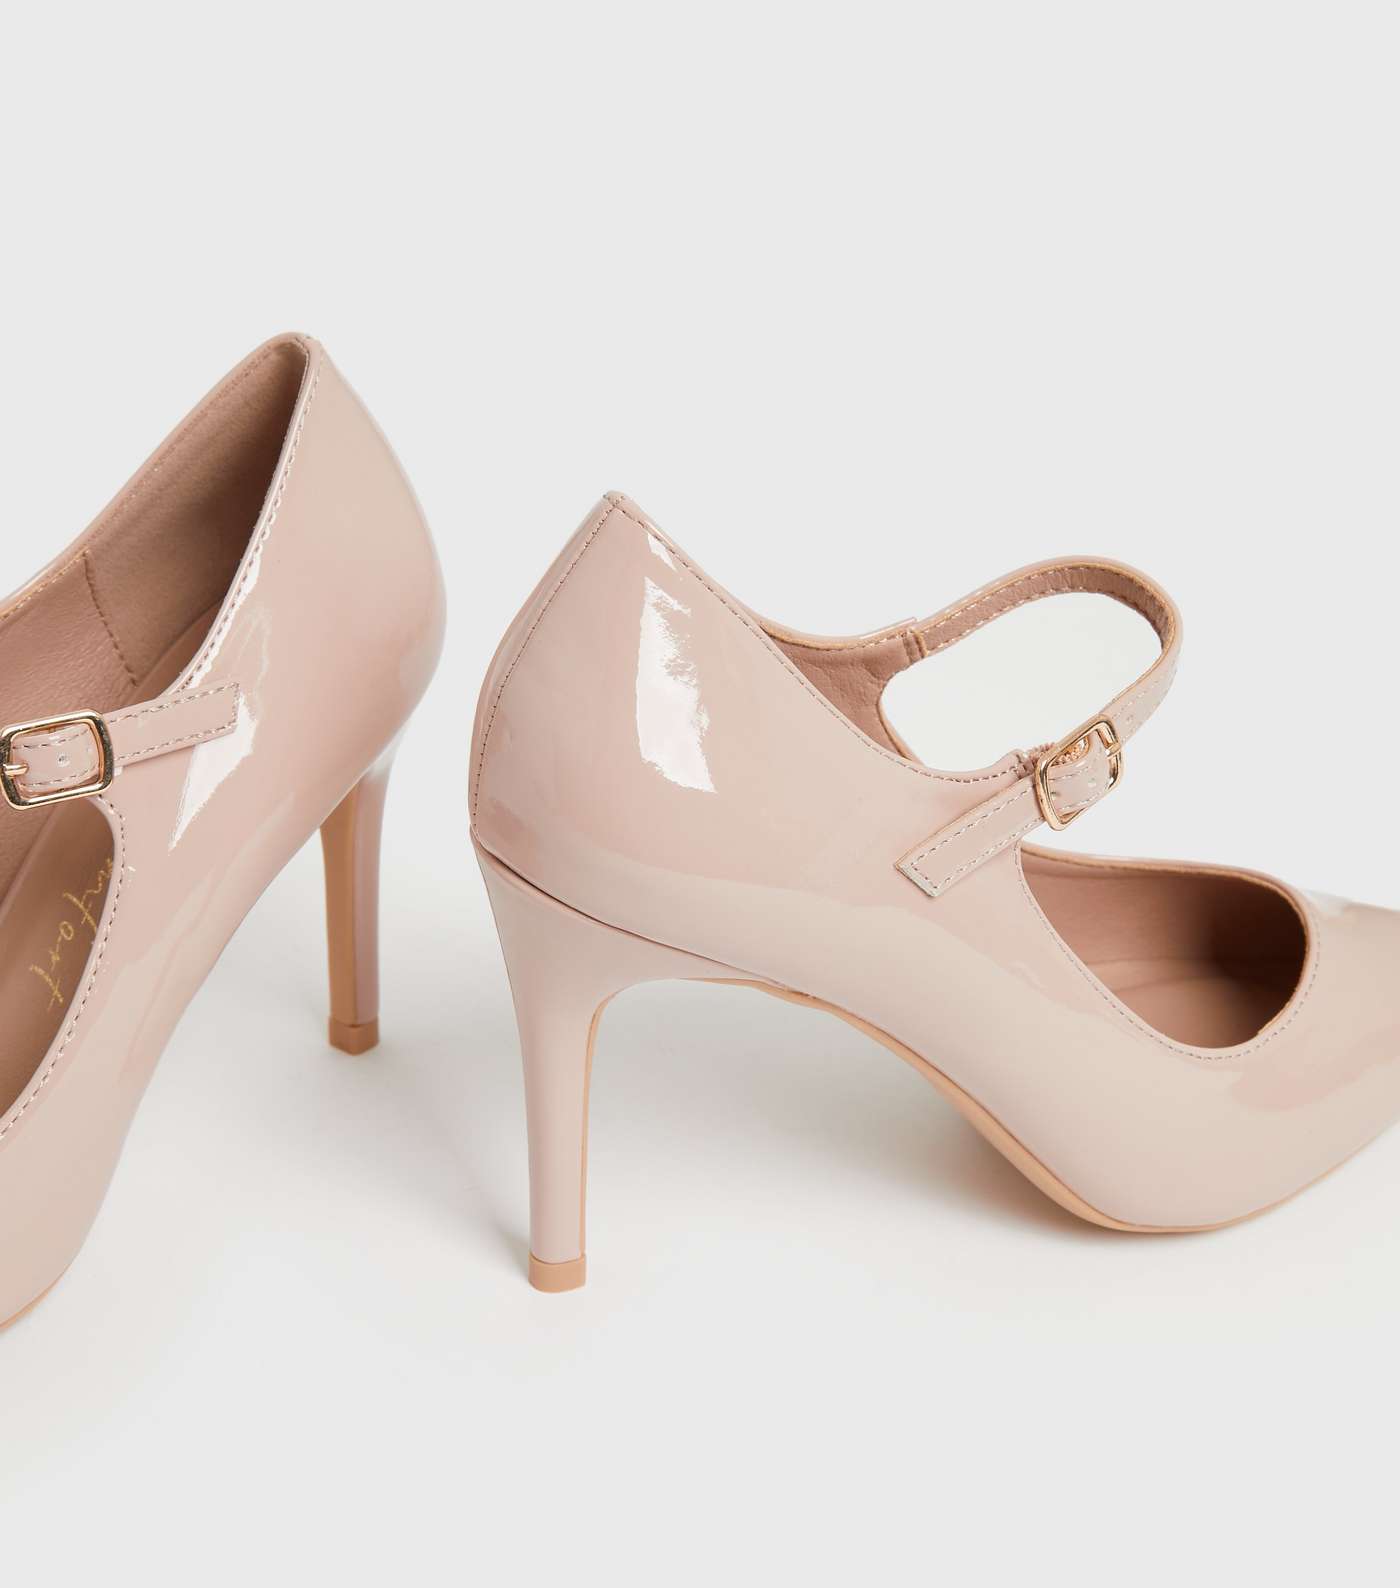 Pale Pink Patent Buckle Stiletto Heel Court Shoes Image 4